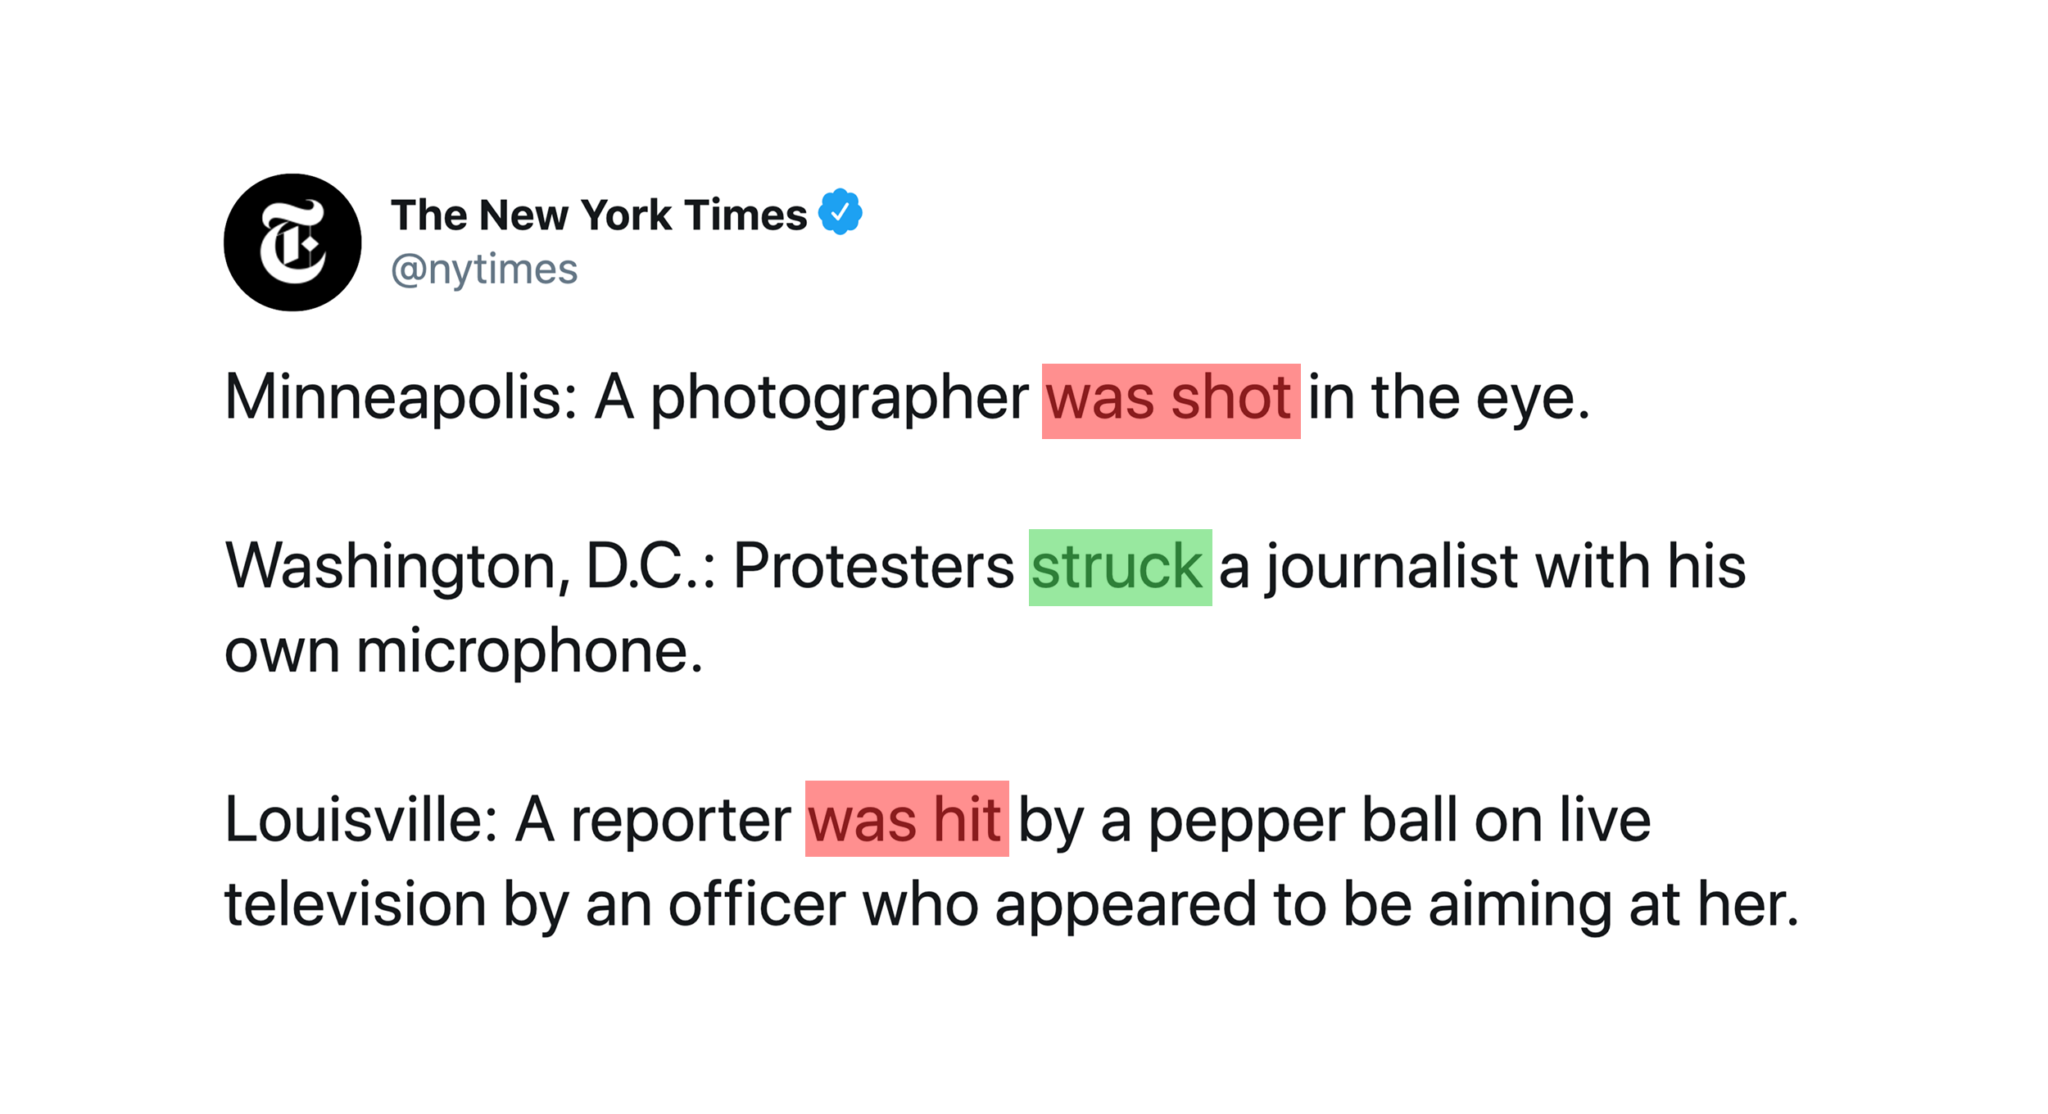 The New York Times was accused of siding with police because of ill